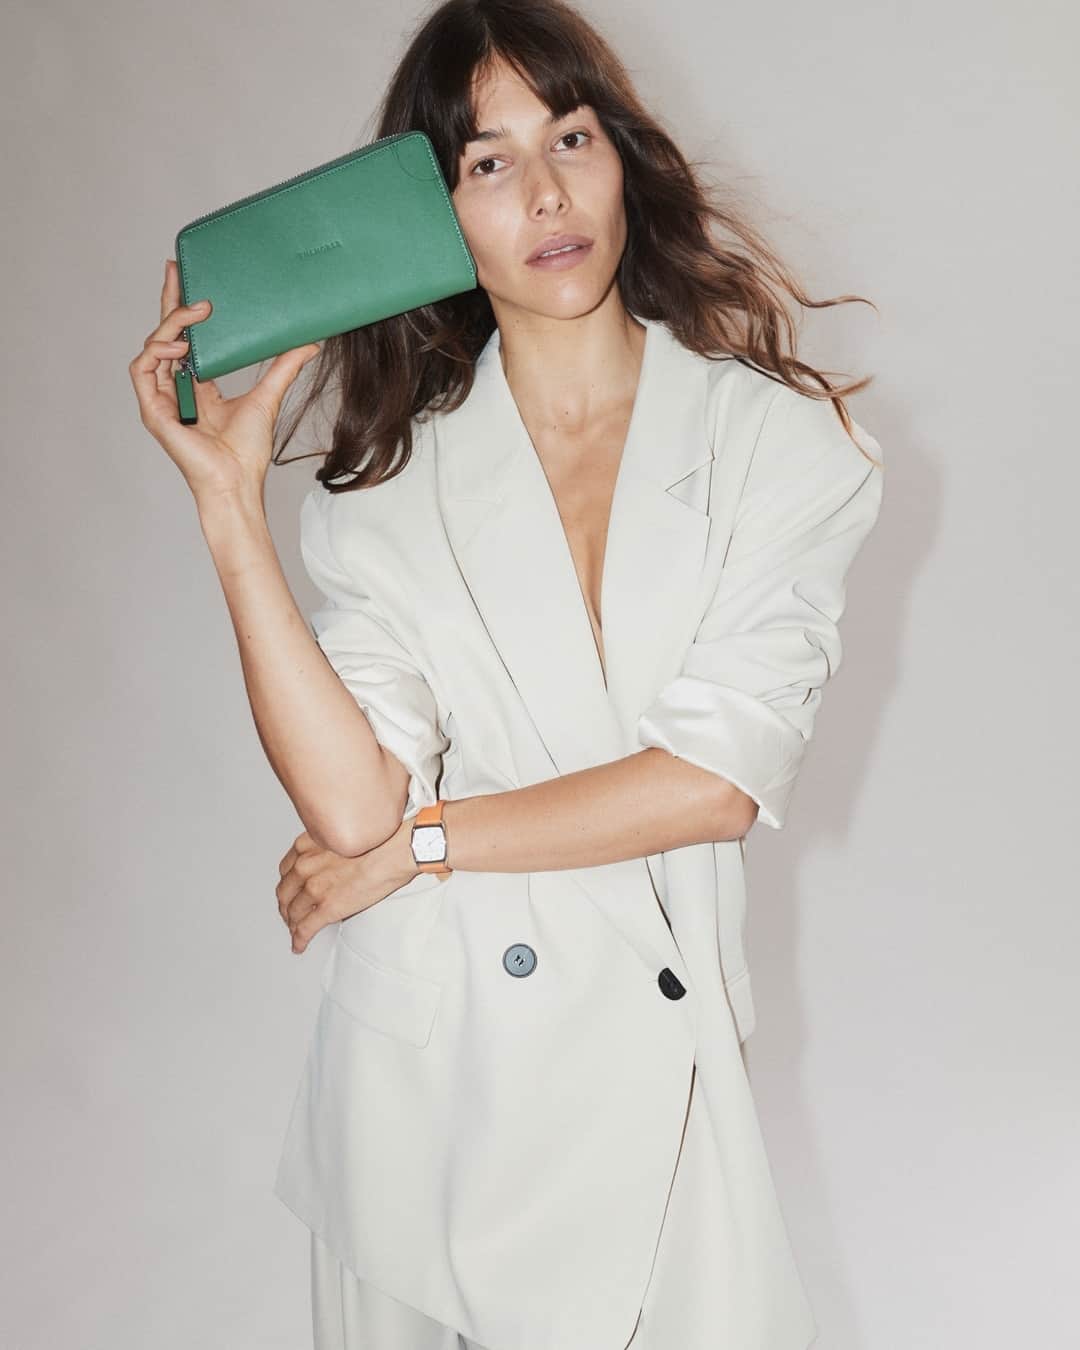 The Horseのインスタグラム：「NEW IN: Wallets & Purses.⁠ Keep your necessities safe in our fun, yet functional new season wallet collection. Available now in seasonal colour updates, they make a sweet gift for a loved one (or your lovely self). Helena holds the new Freddie wallet in seasonal hue Forest Green.」